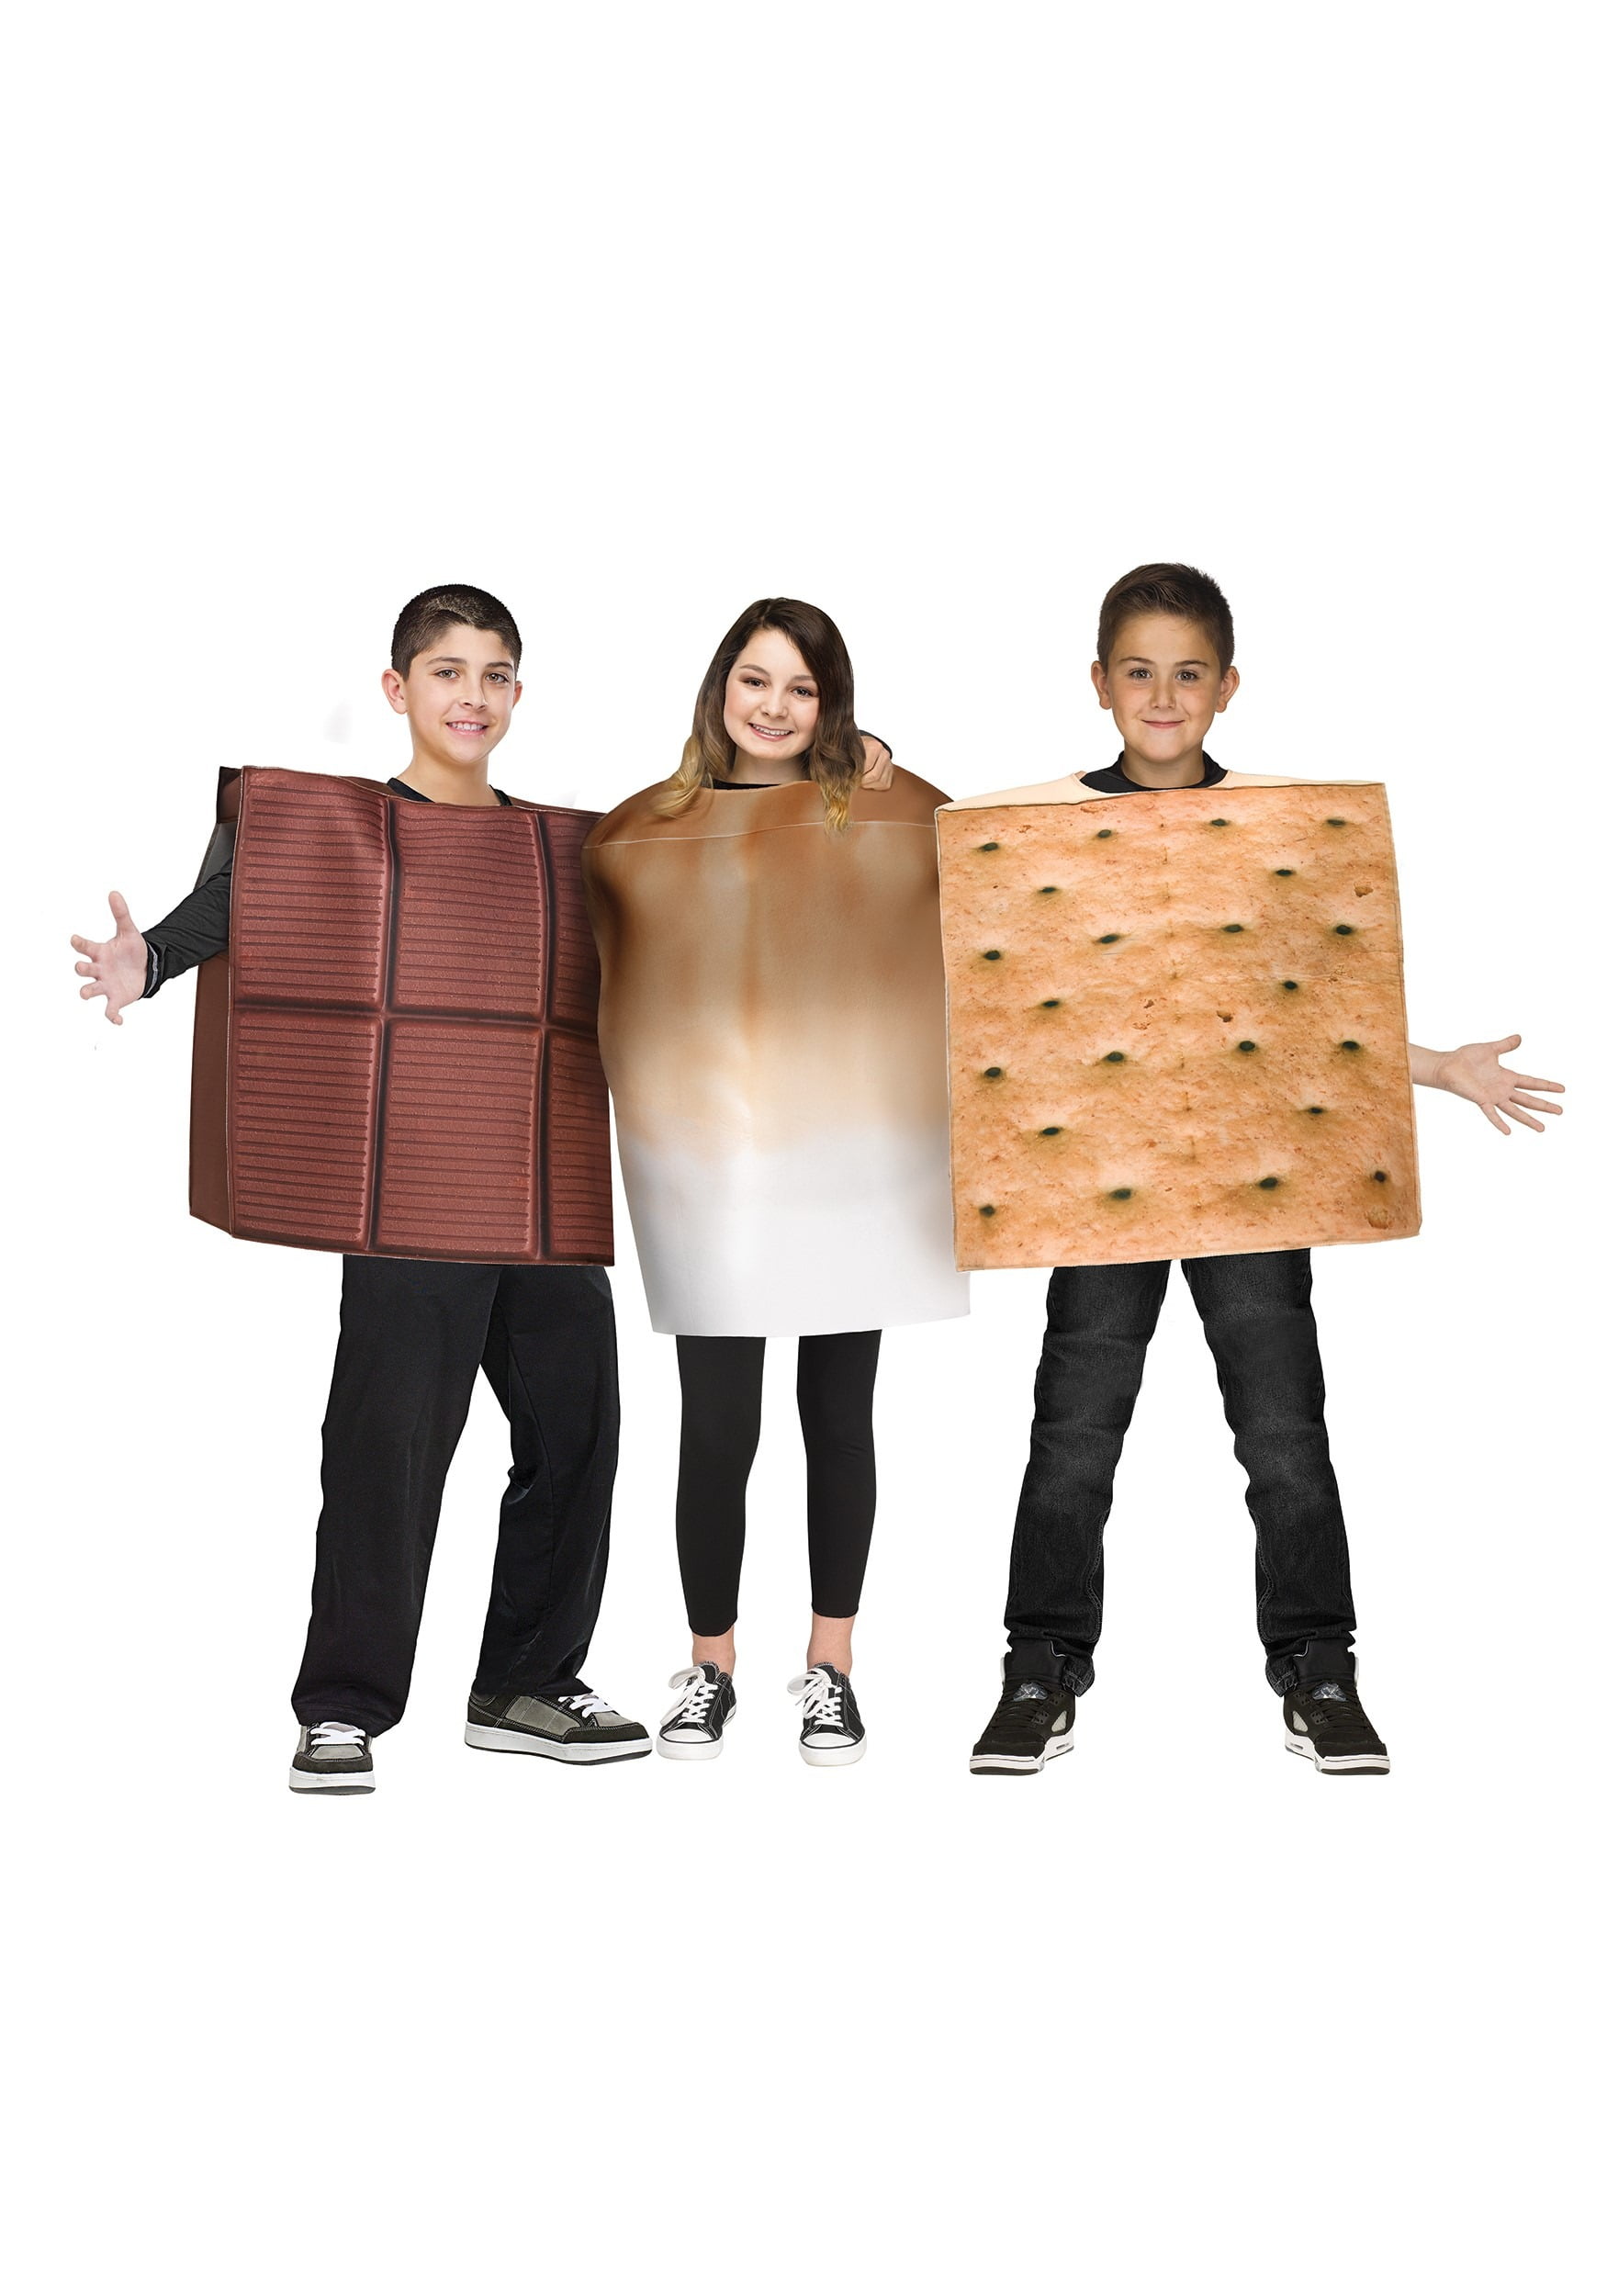 Two Tunics S'mores Snack Couple Halloween Costume for Adults Standard Size 